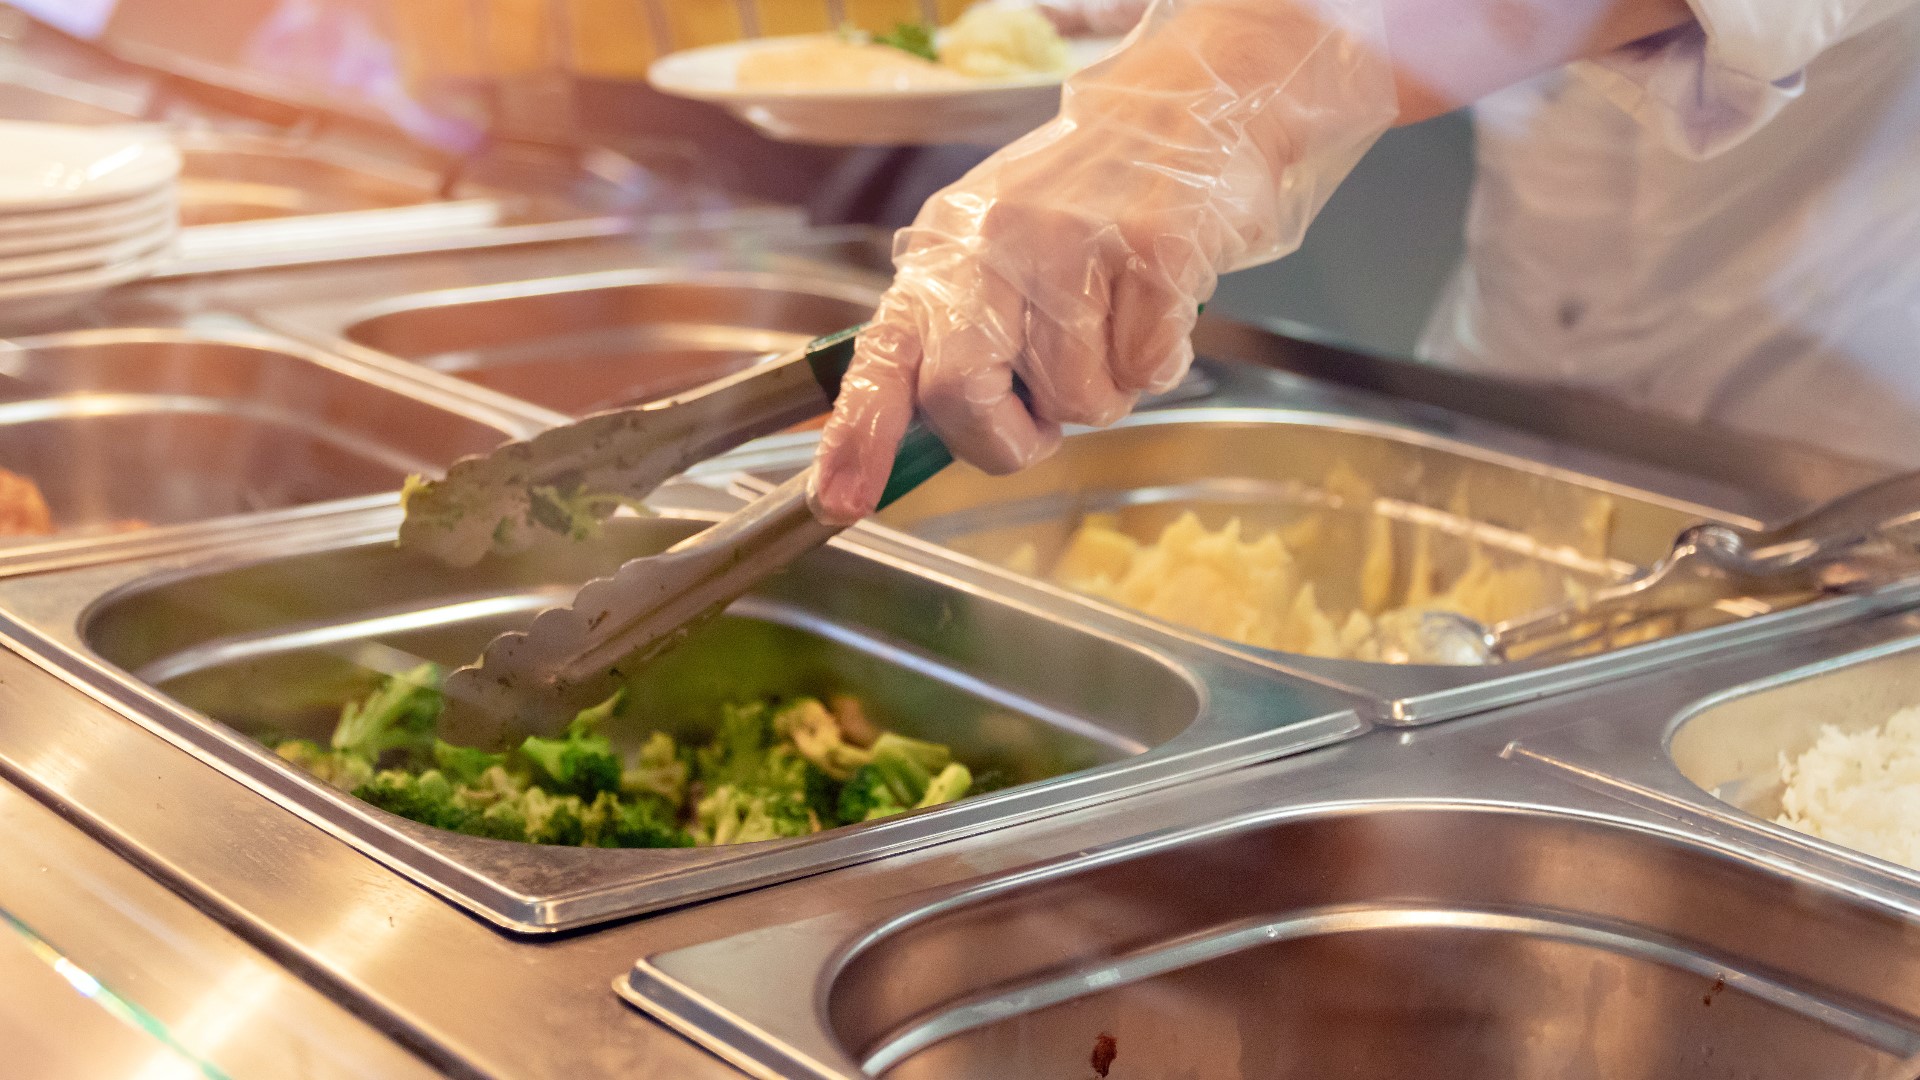 The USDA is extending its free lunch program for all through June 2022.